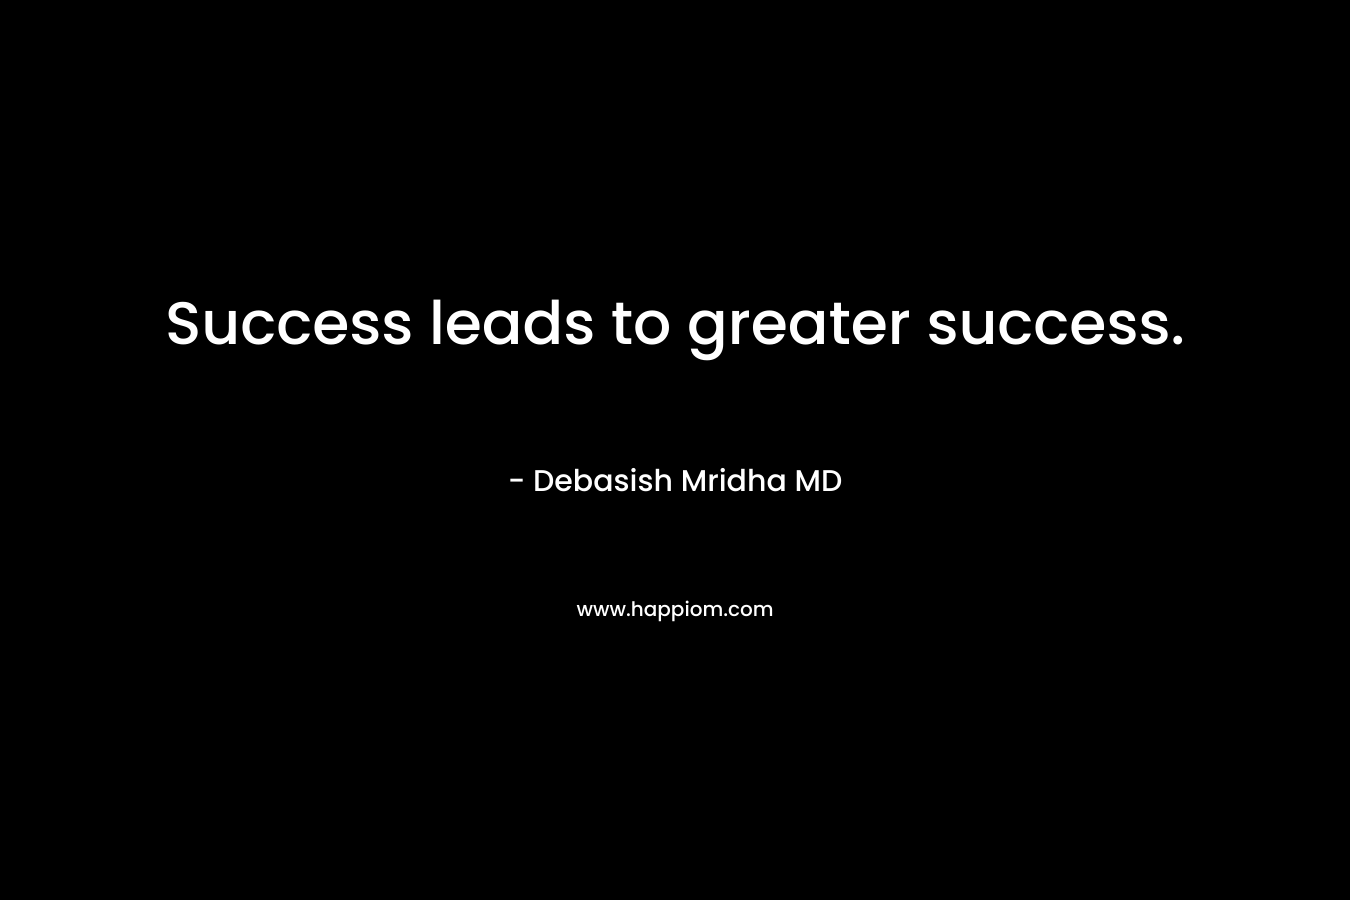 Success leads to greater success.